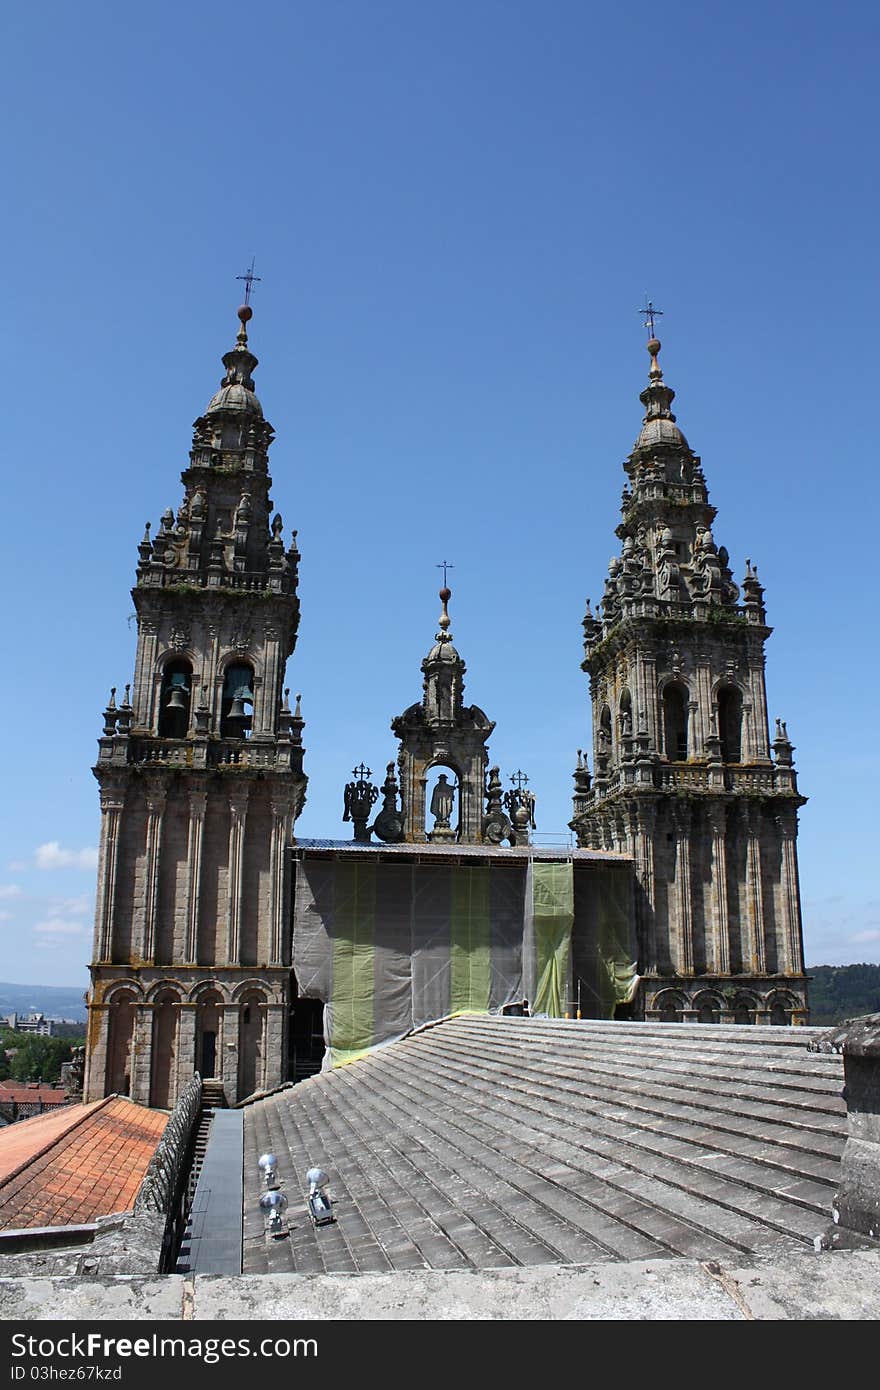 Image from the stone roof of Santiago de Compostela´s pilgrimage cathedral in galicia, spain. You can see the towers from the roof, the oposite vision of obradoiro´s square. Image from the stone roof of Santiago de Compostela´s pilgrimage cathedral in galicia, spain. You can see the towers from the roof, the oposite vision of obradoiro´s square.